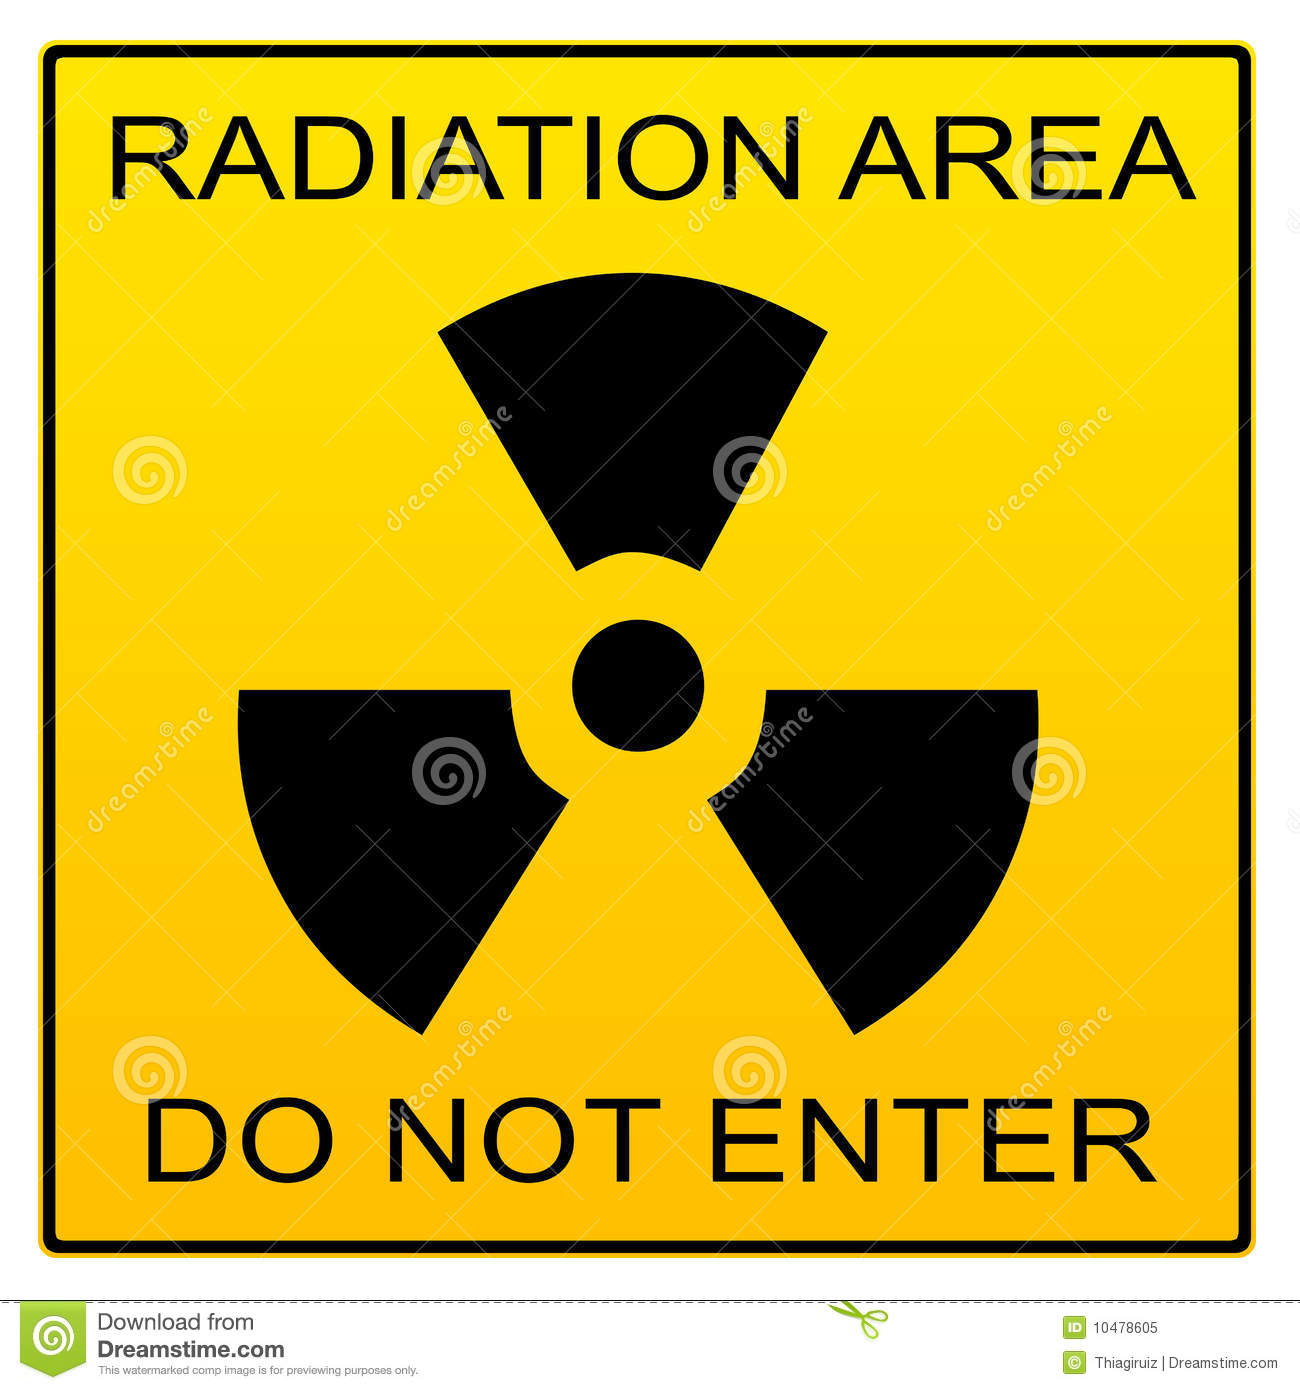 Nice Images Collection: Radiation Desktop Wallpapers